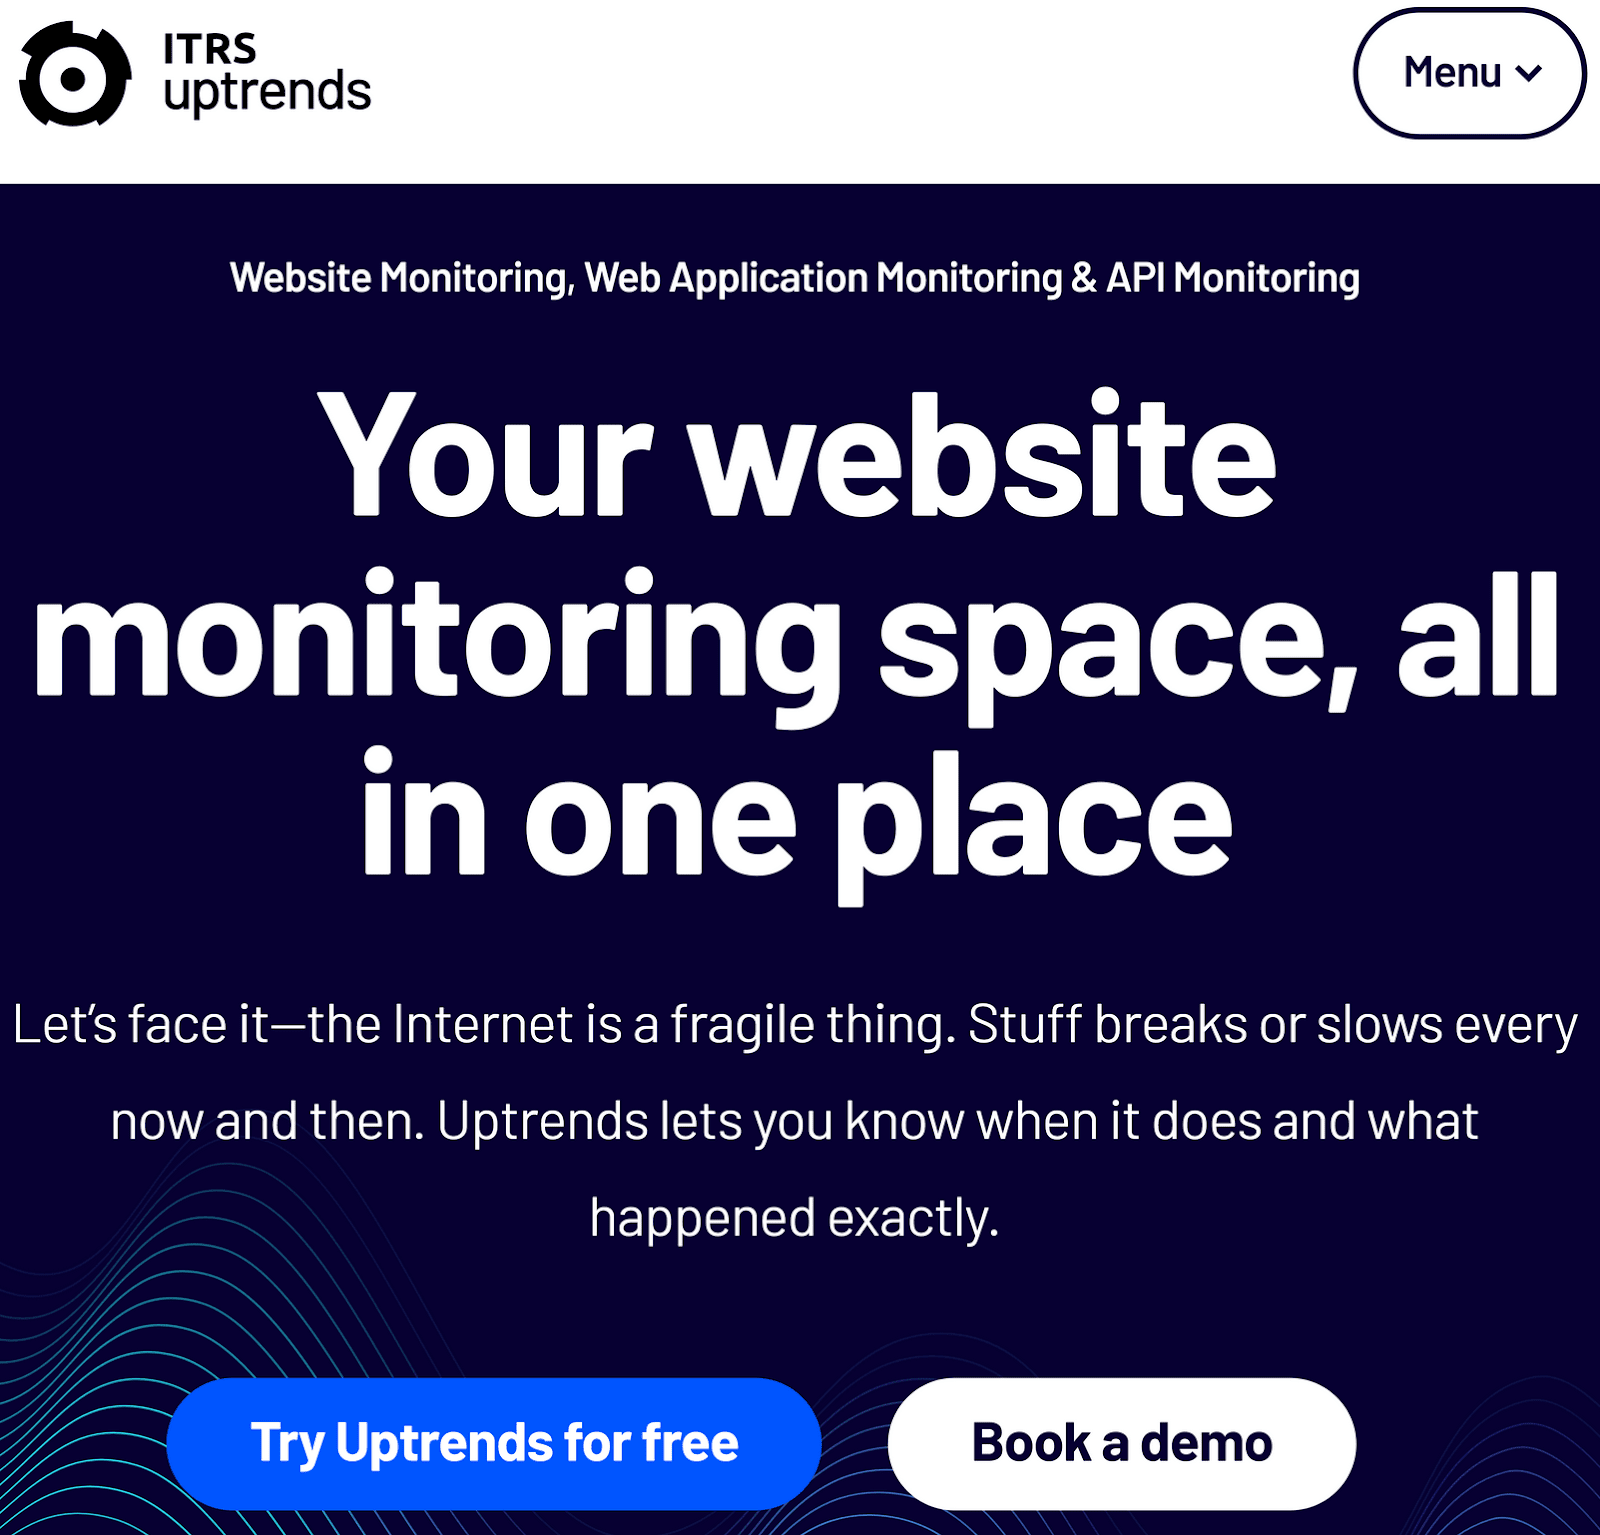 ITRS Uptrends homepage showcasing web application and API monitoring services with buttons to try for free or book a demo.